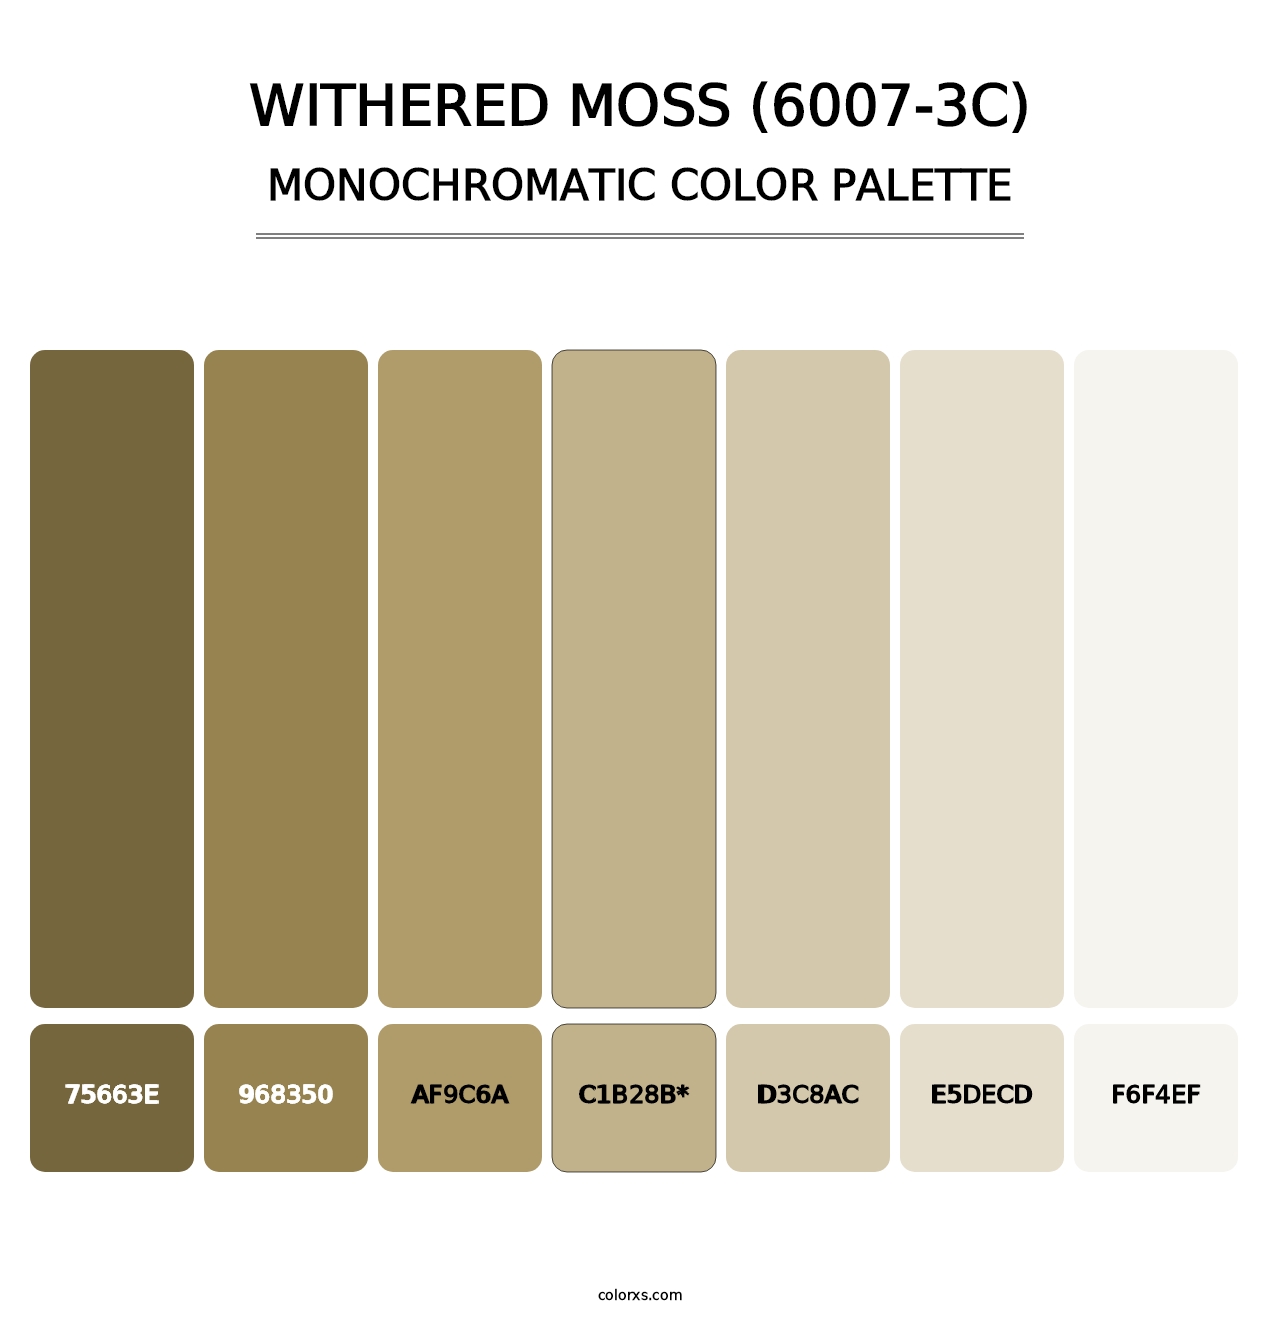 Withered Moss (6007-3C) - Monochromatic Color Palette